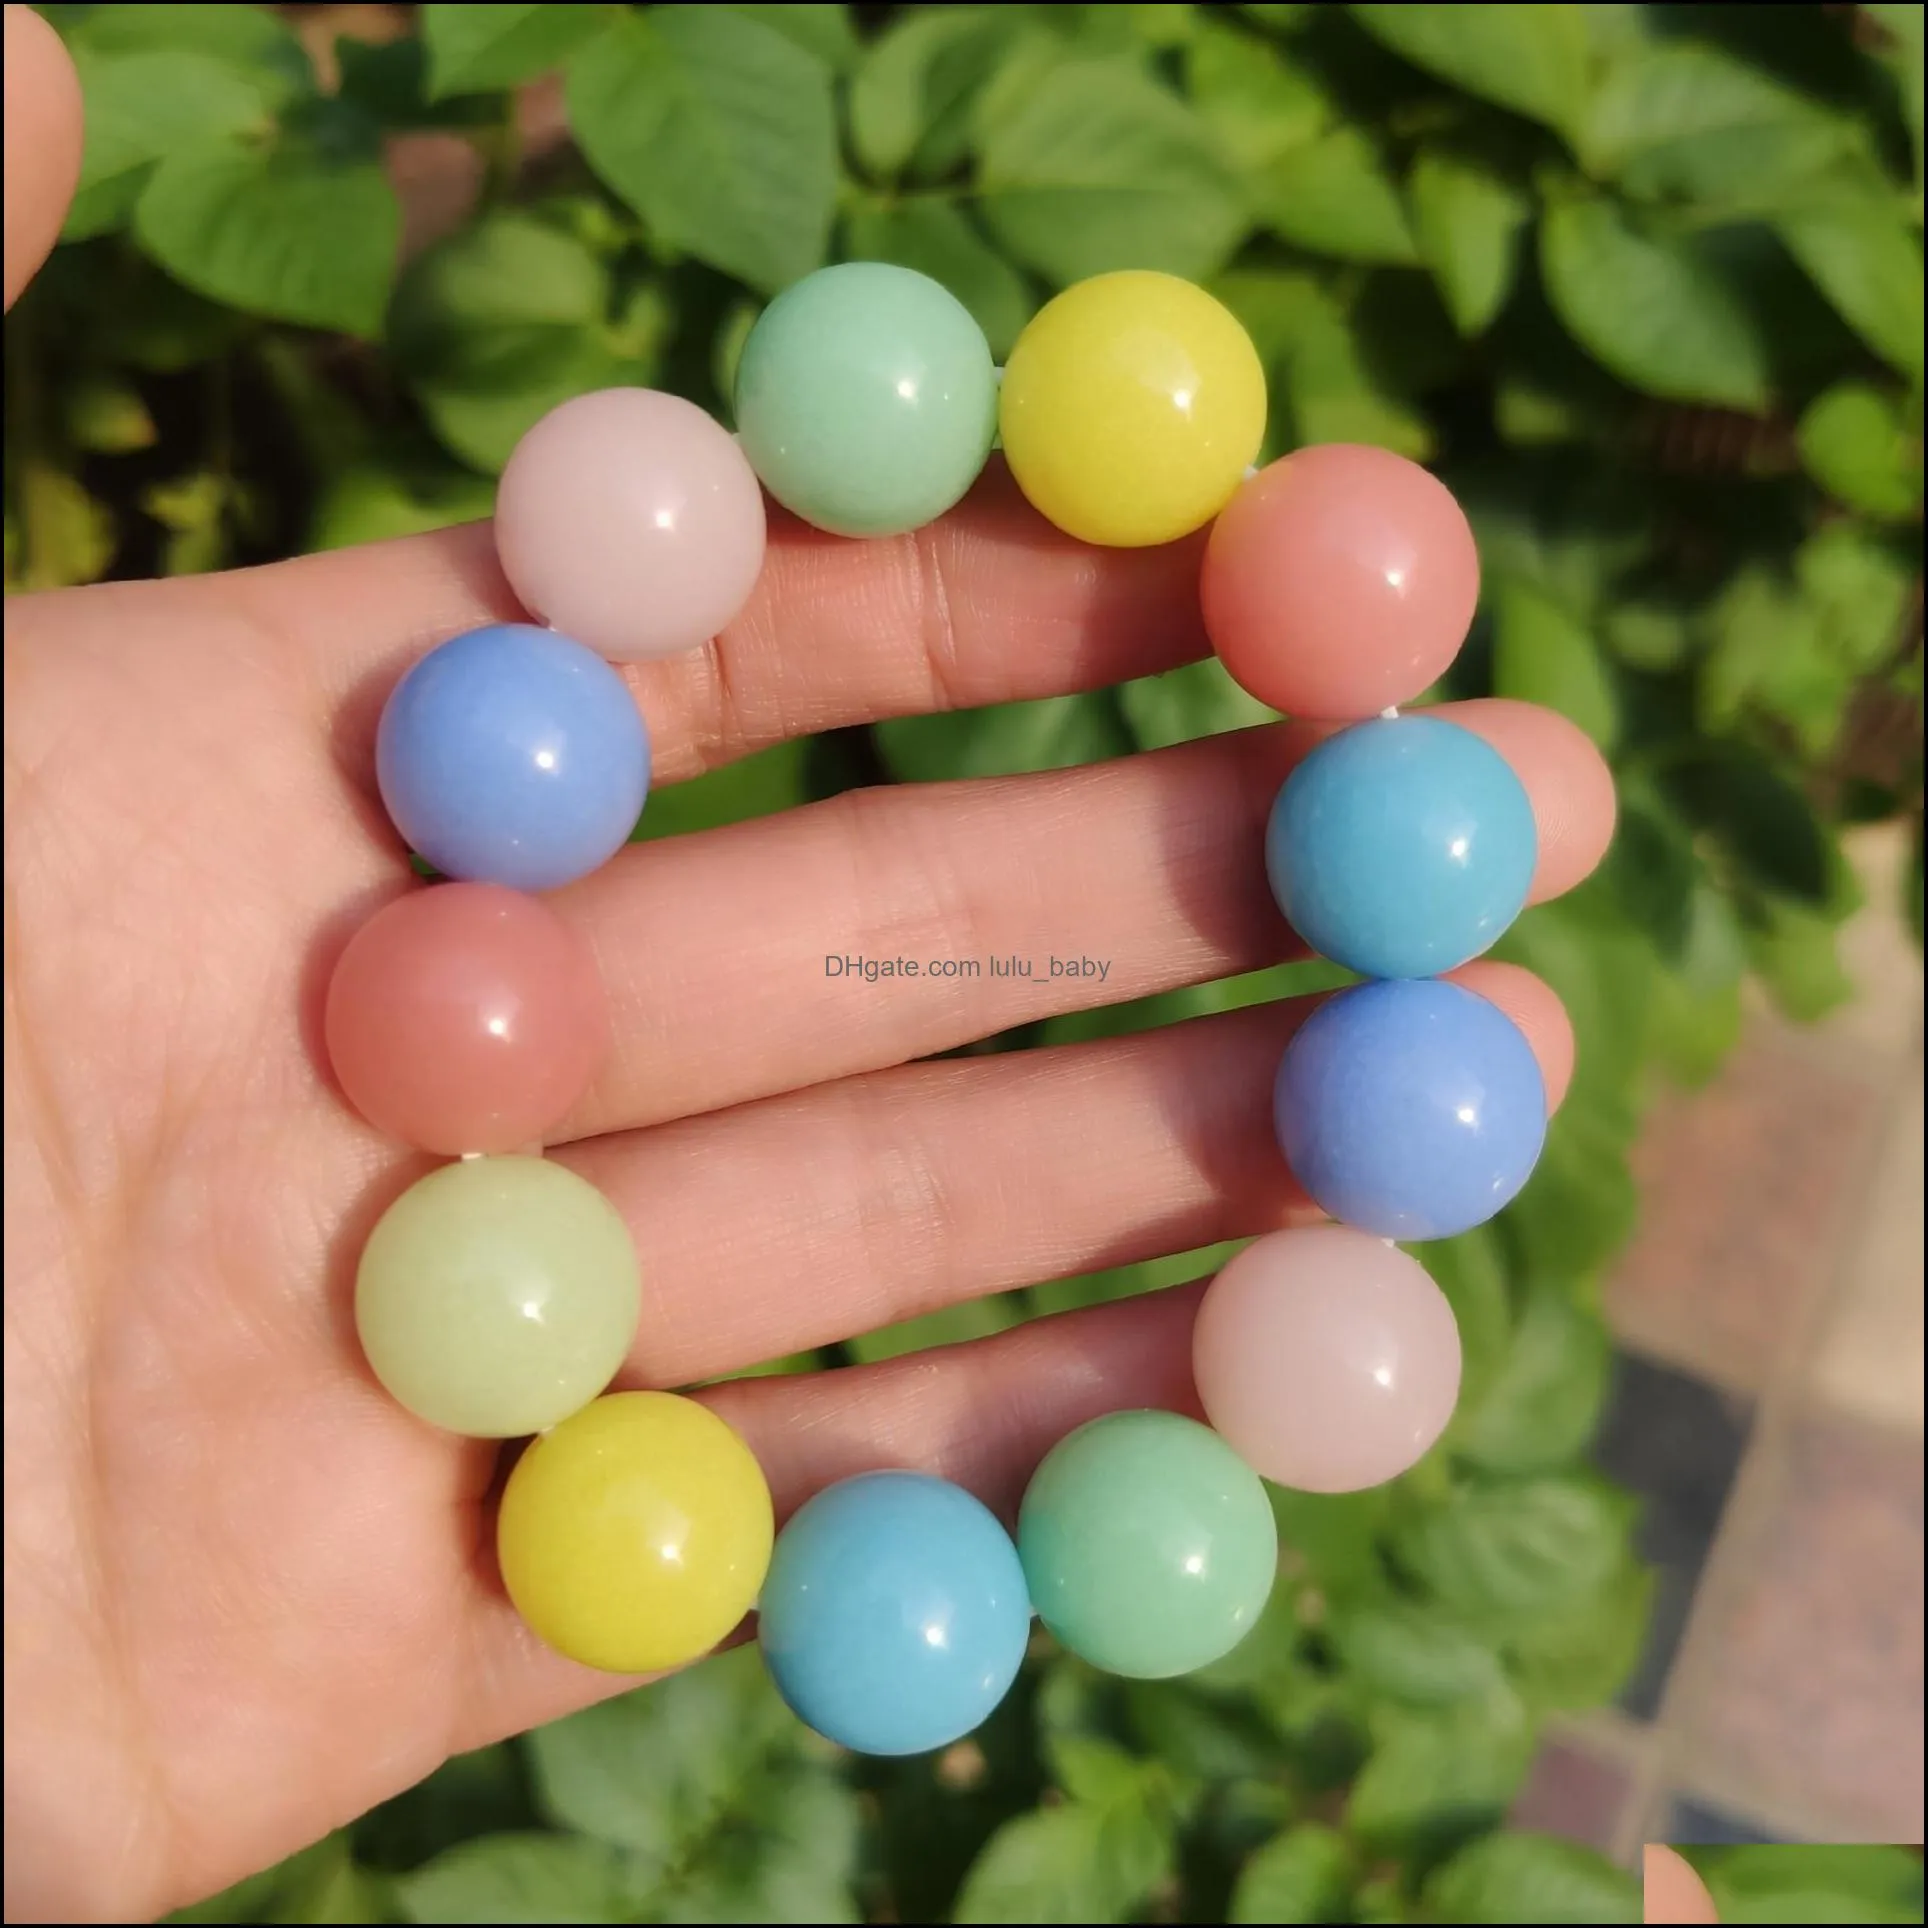 10mm round ball shape luminous stone beads charms fluorescent chakra healing glow in dark for bracelets jewelry accessories